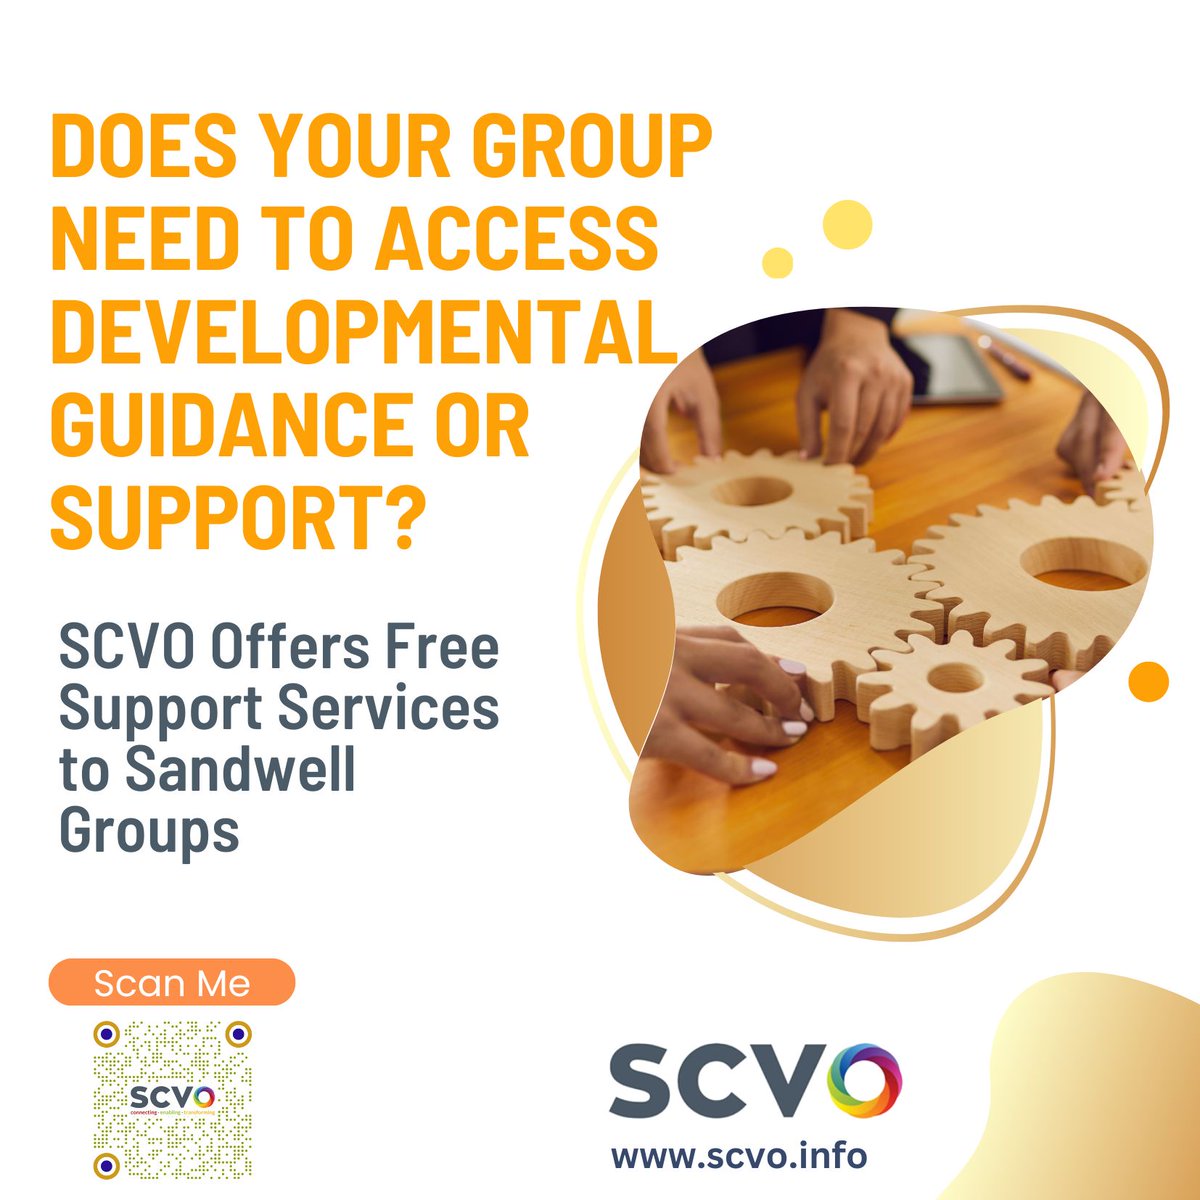 Is your community and voluntary group looking to expand, develop new opportunities or grow its beneficiaries? SCVO’s experienced Capacity Development Team can assist your group to review and evaluate your current practices Visit: scvo.info